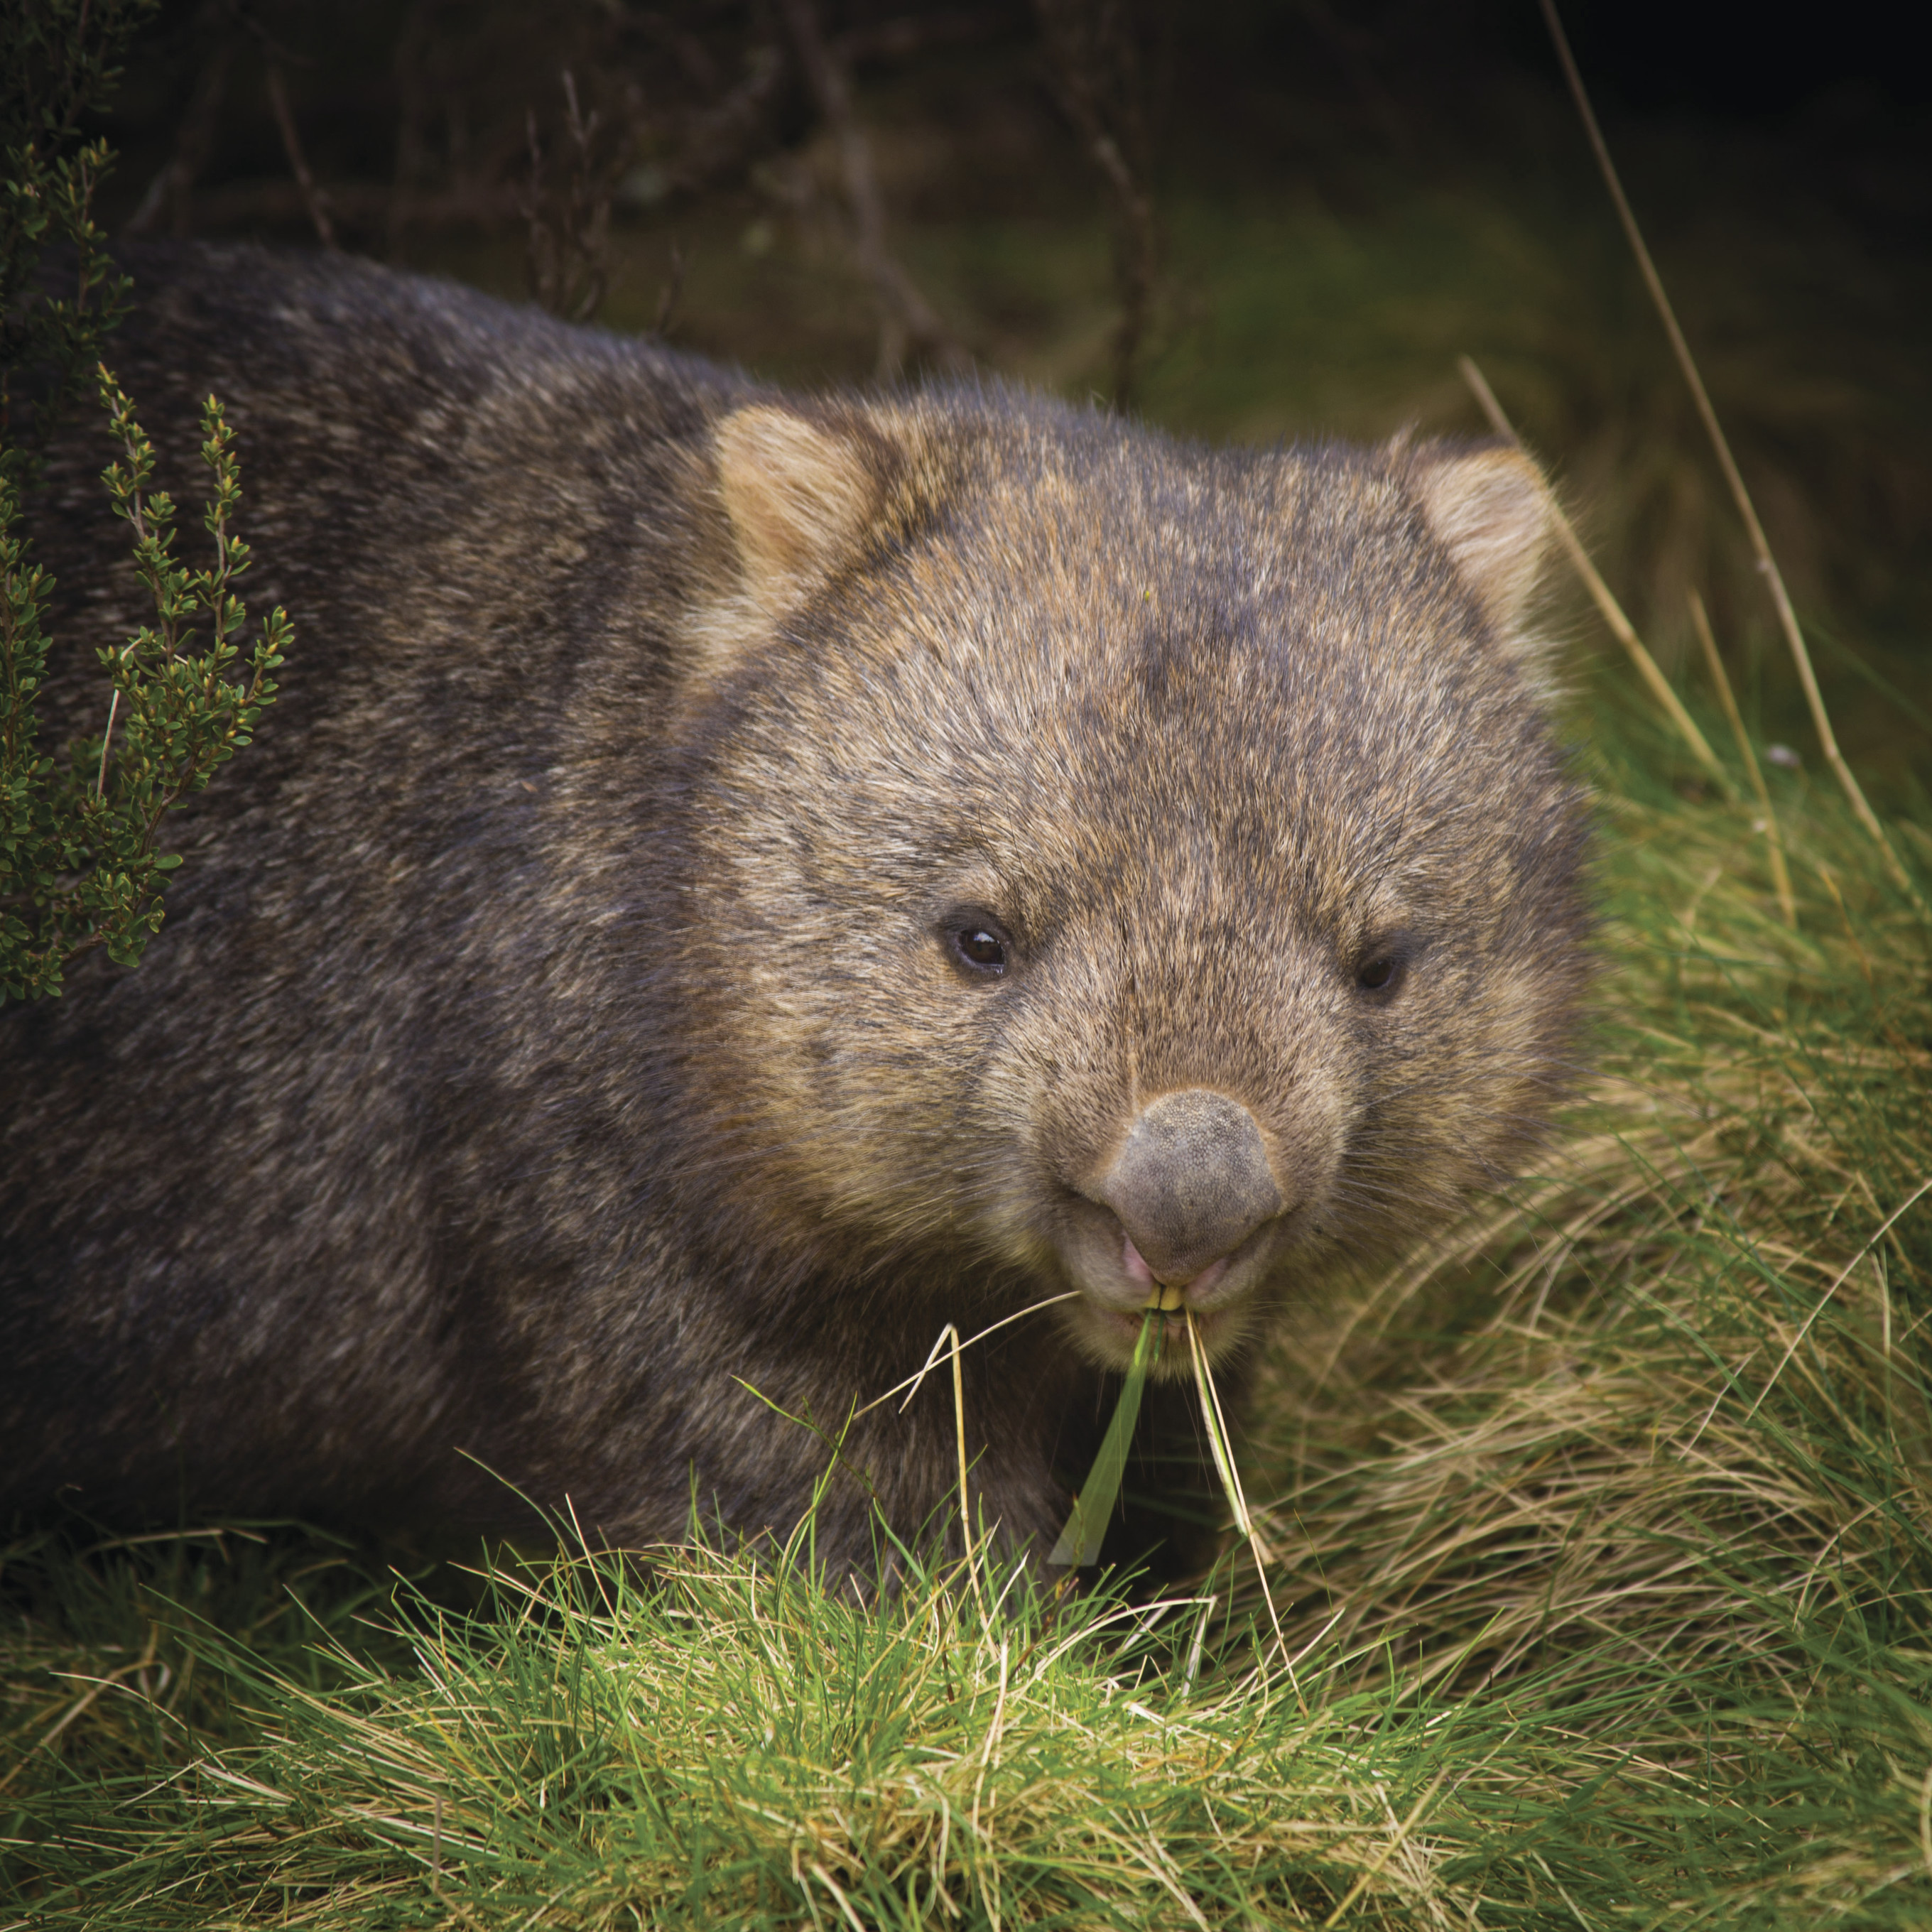 Close up of a wombat amongst the green grass at Narawntapu National Park.